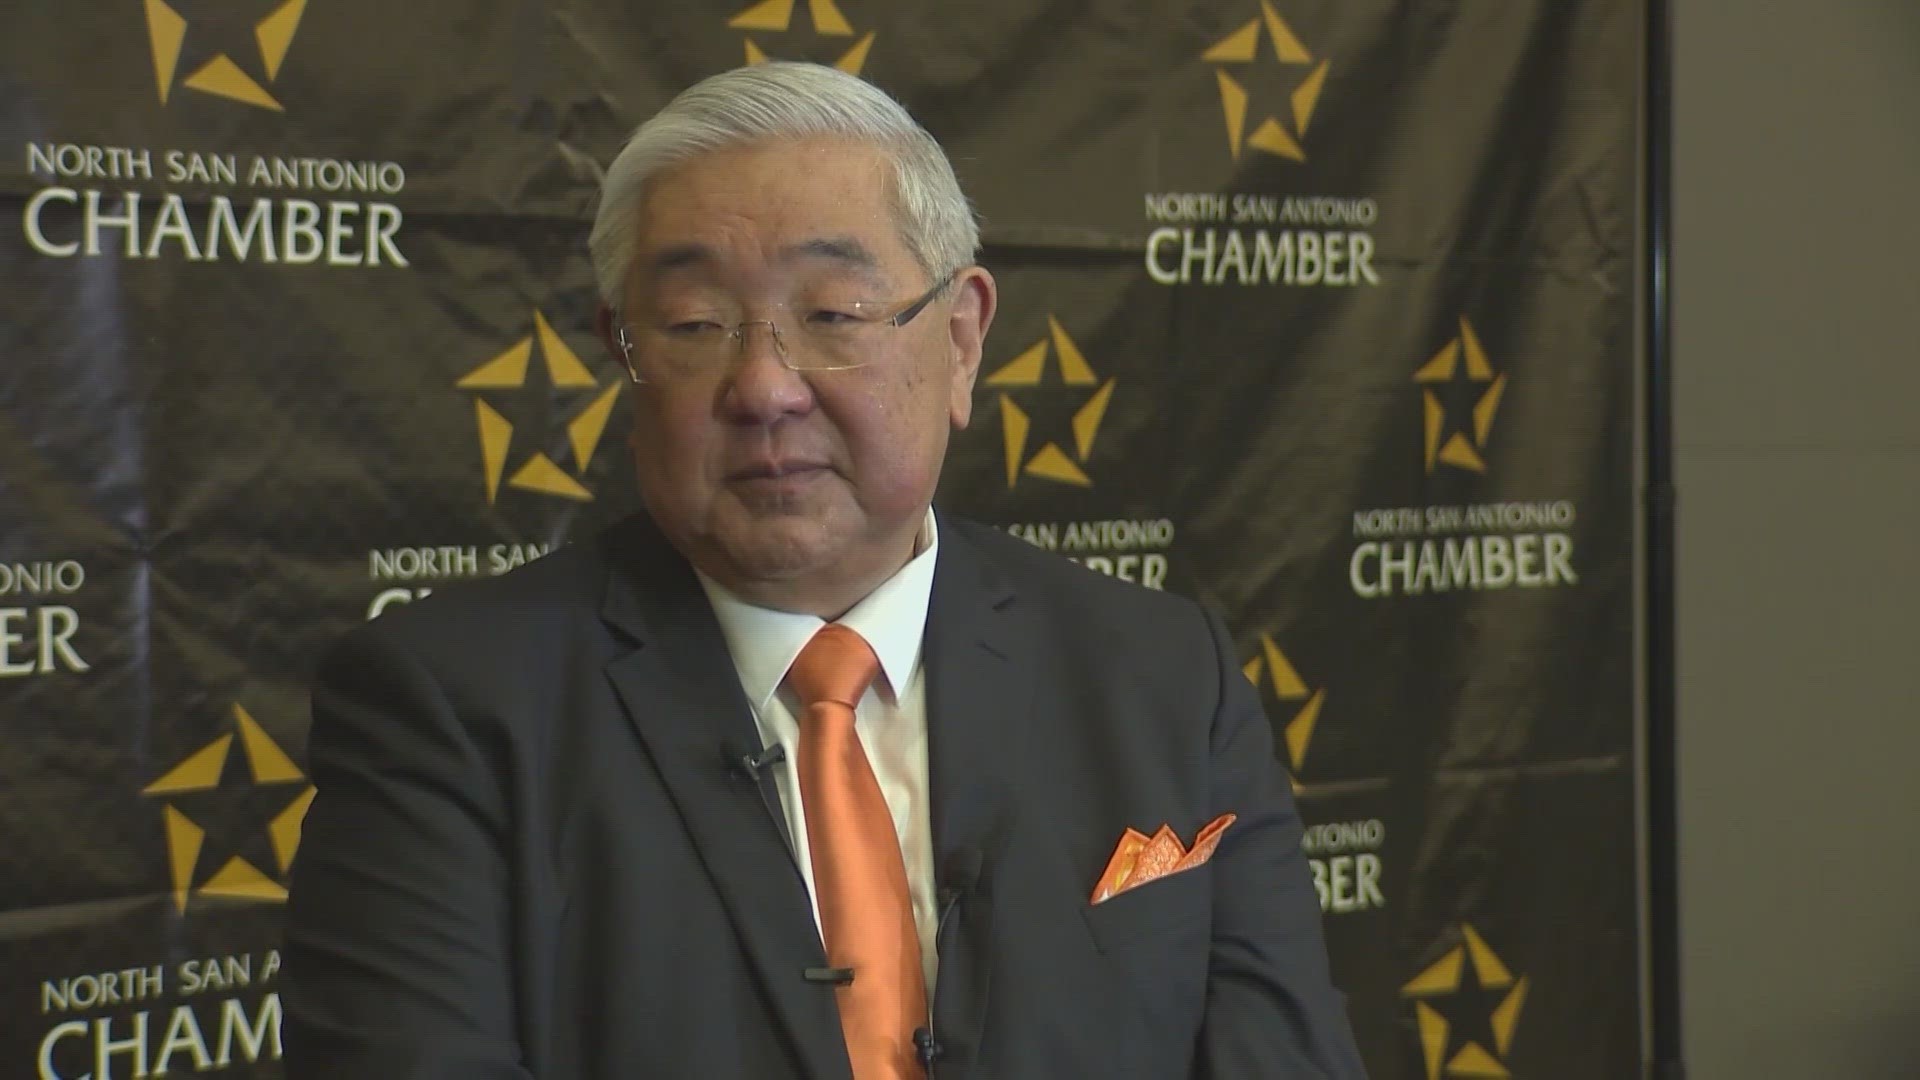 Judge Sakai said his goal is to bring civility and transparency in county government.